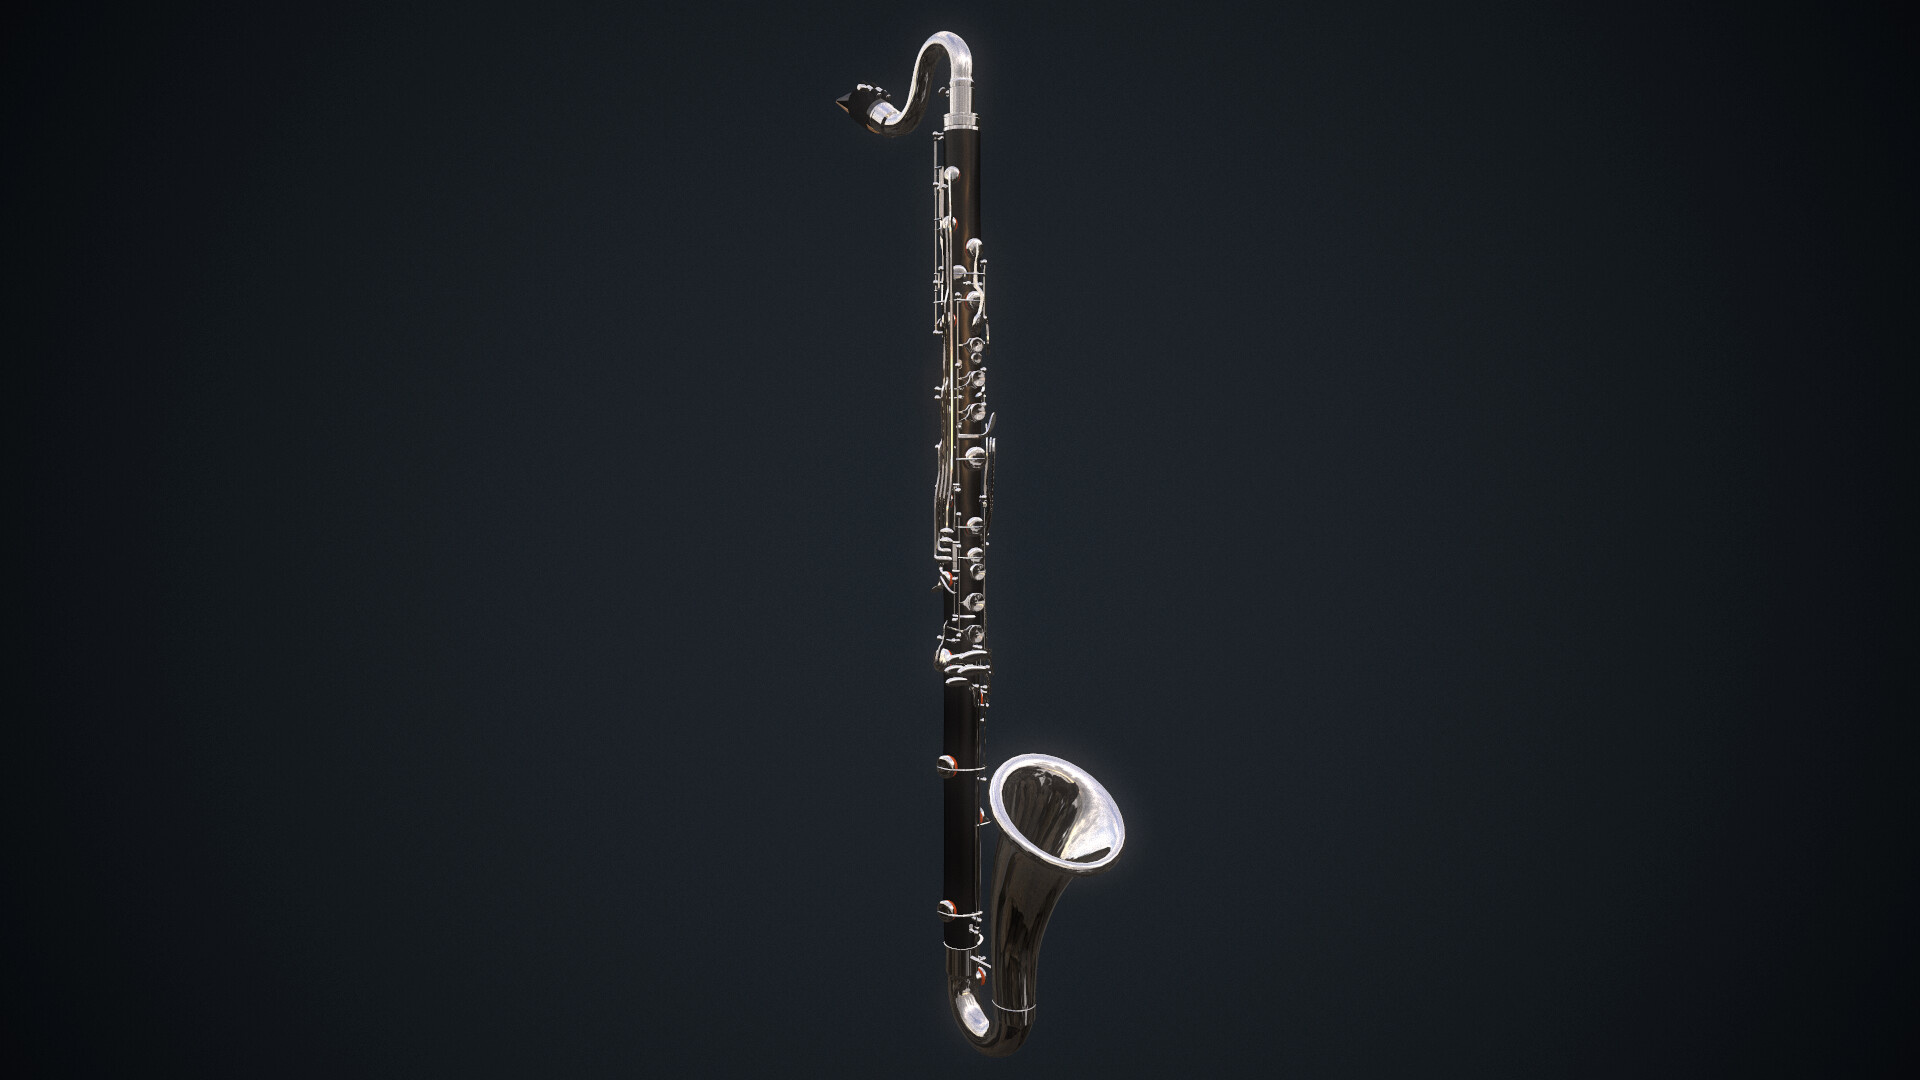 Clarinet: Straight-bodied bass clarinet, A small upturned silver-colored metal bell and curved metal neck. 1920x1080 Full HD Wallpaper.